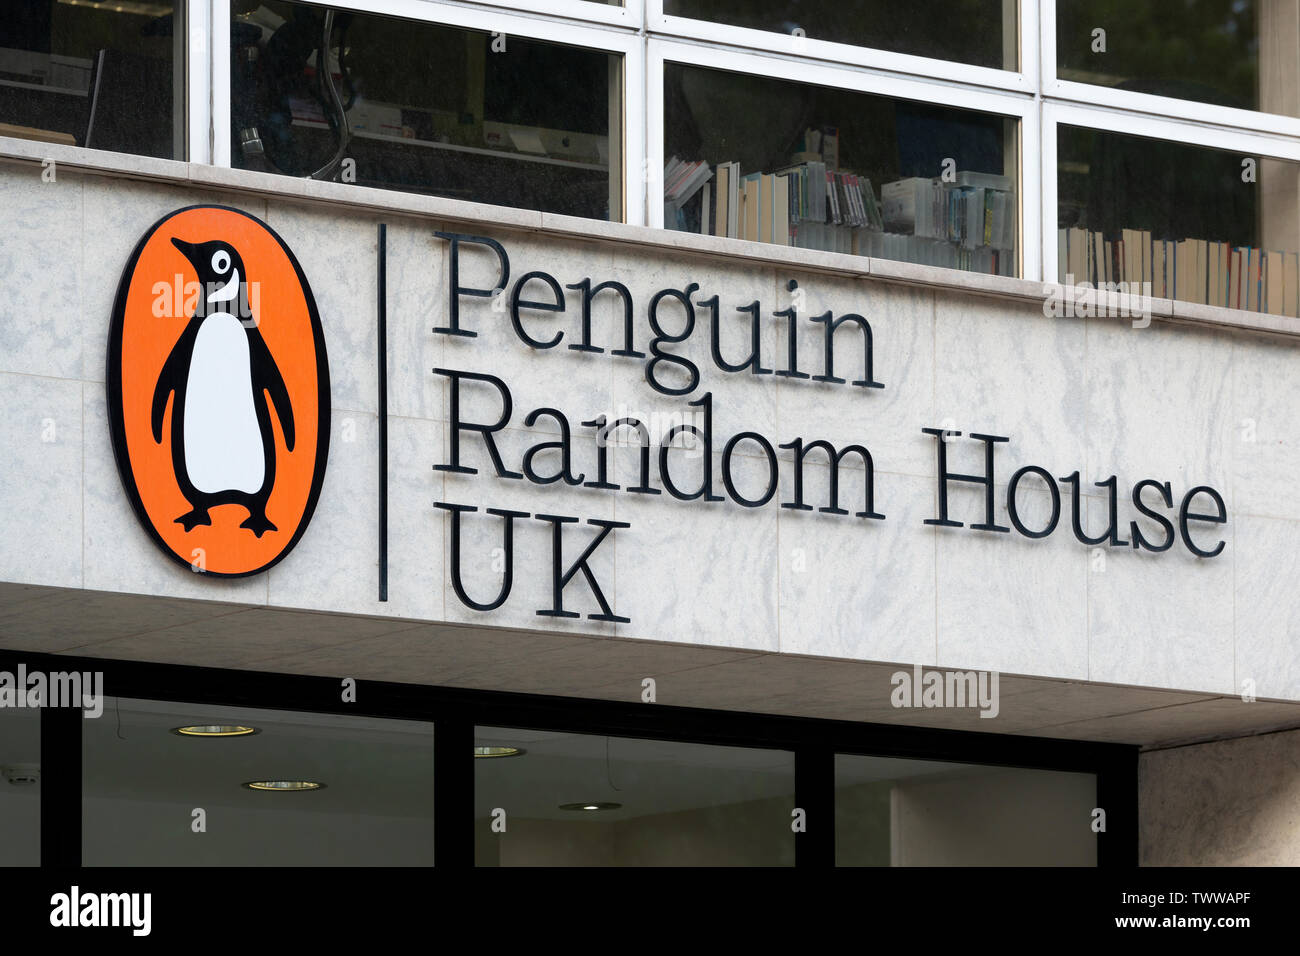 Signage for the Penguin Random House building located on Vauxhall Bridge Road in London, UK. Stock Photo